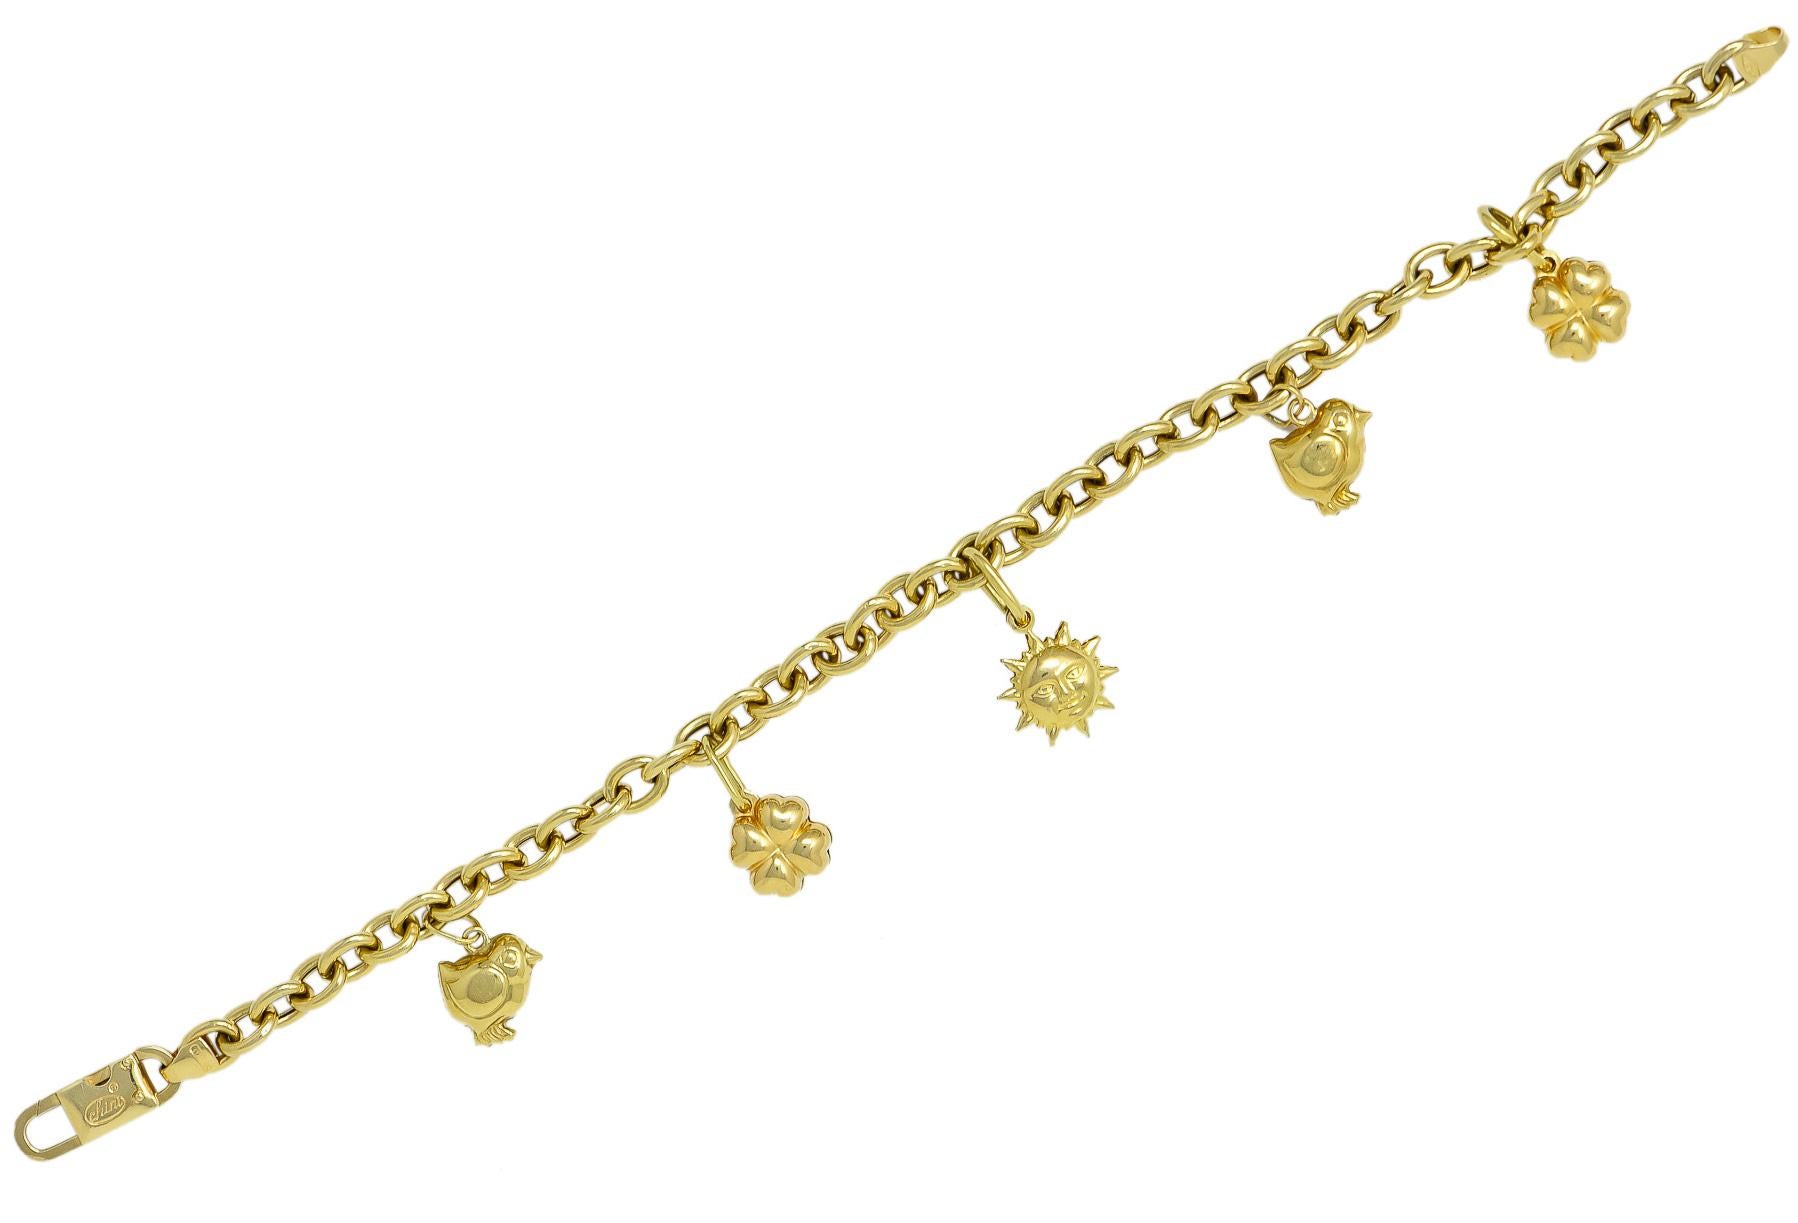 Charm bracelet designed as polished gold links

With elongated link drops featuring hollow polished gold charms of chicks, clovers, and a smiling sun

Completed by lobster clasp

Signed Chini for Fratelli Chini with Italian assay mark

Stamped 750